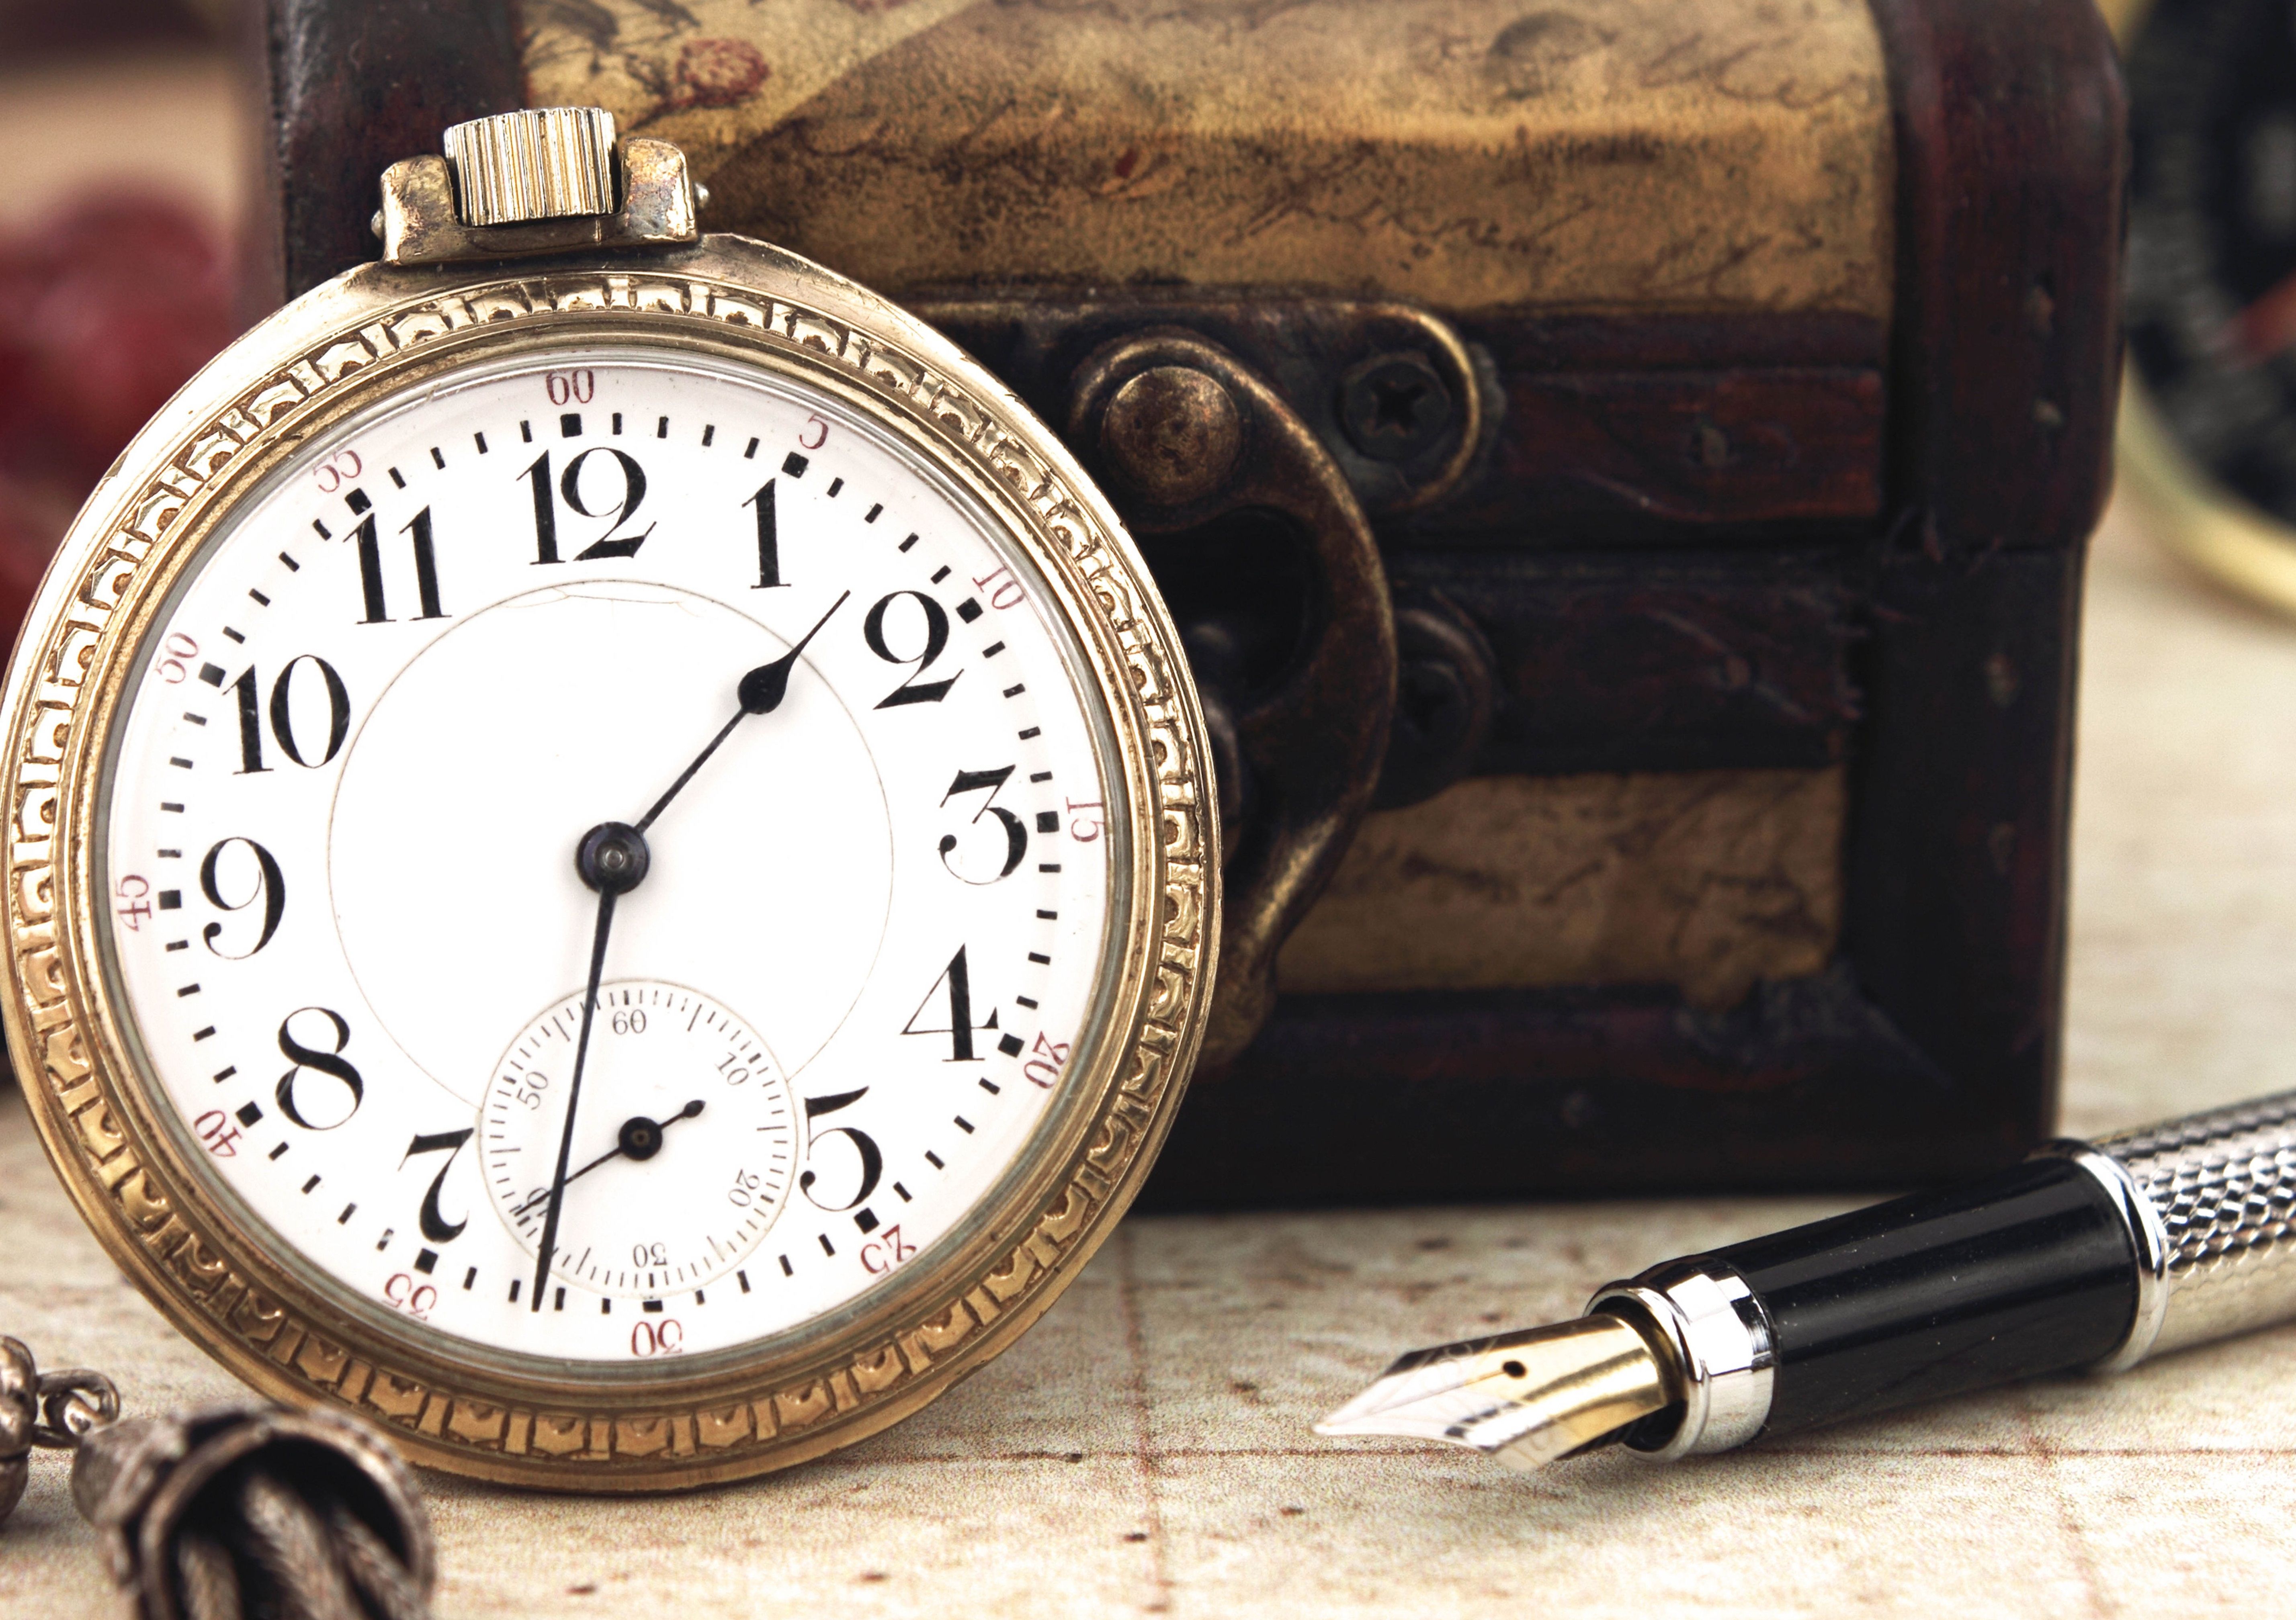 Download wallpaper 5713x4032 vintage, clock, dial, box, pen, necklace, keychain HD background